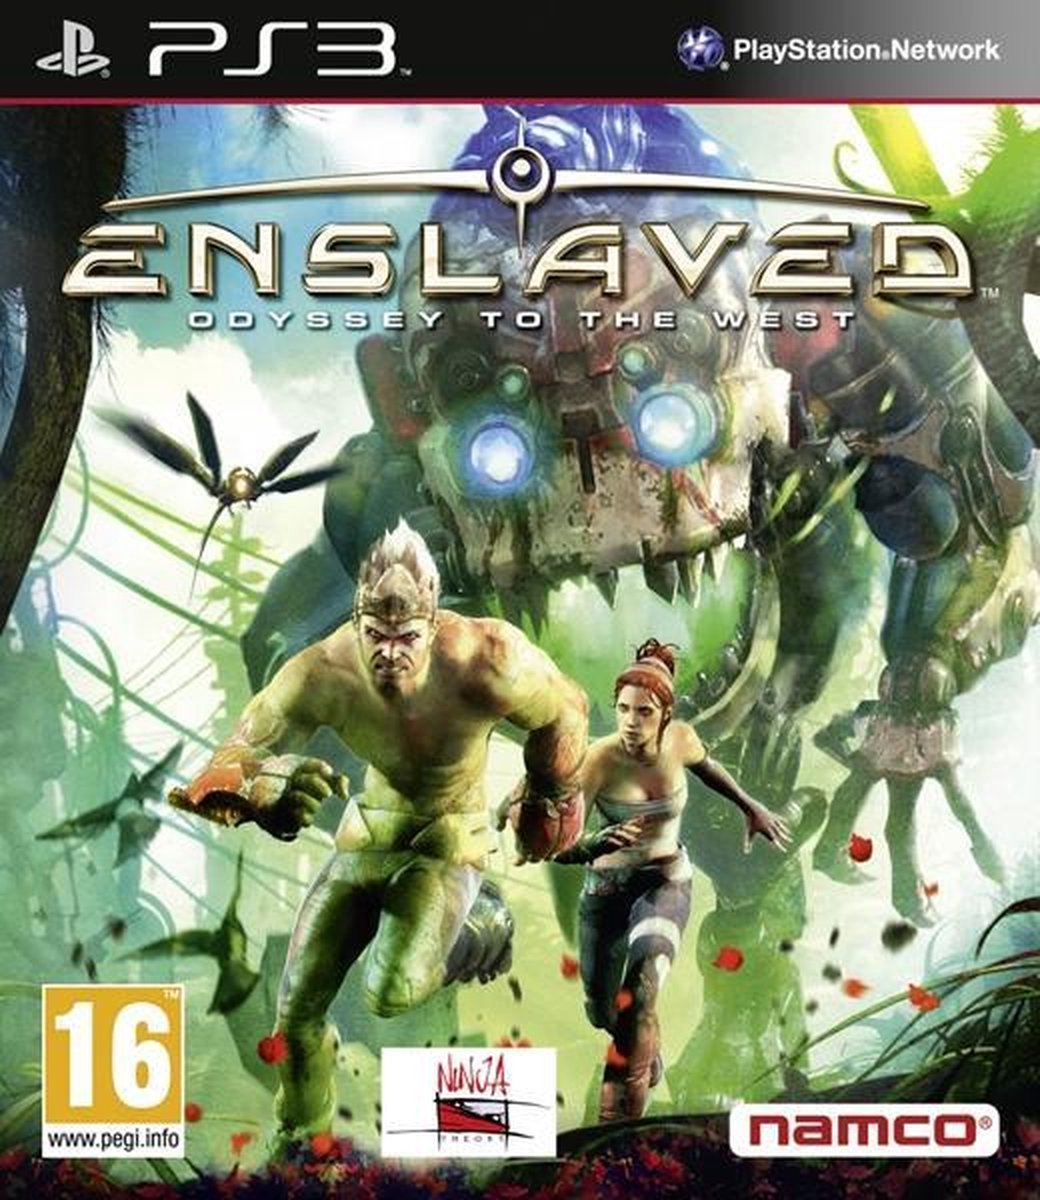 ps3 enslaved odyssey to the west download